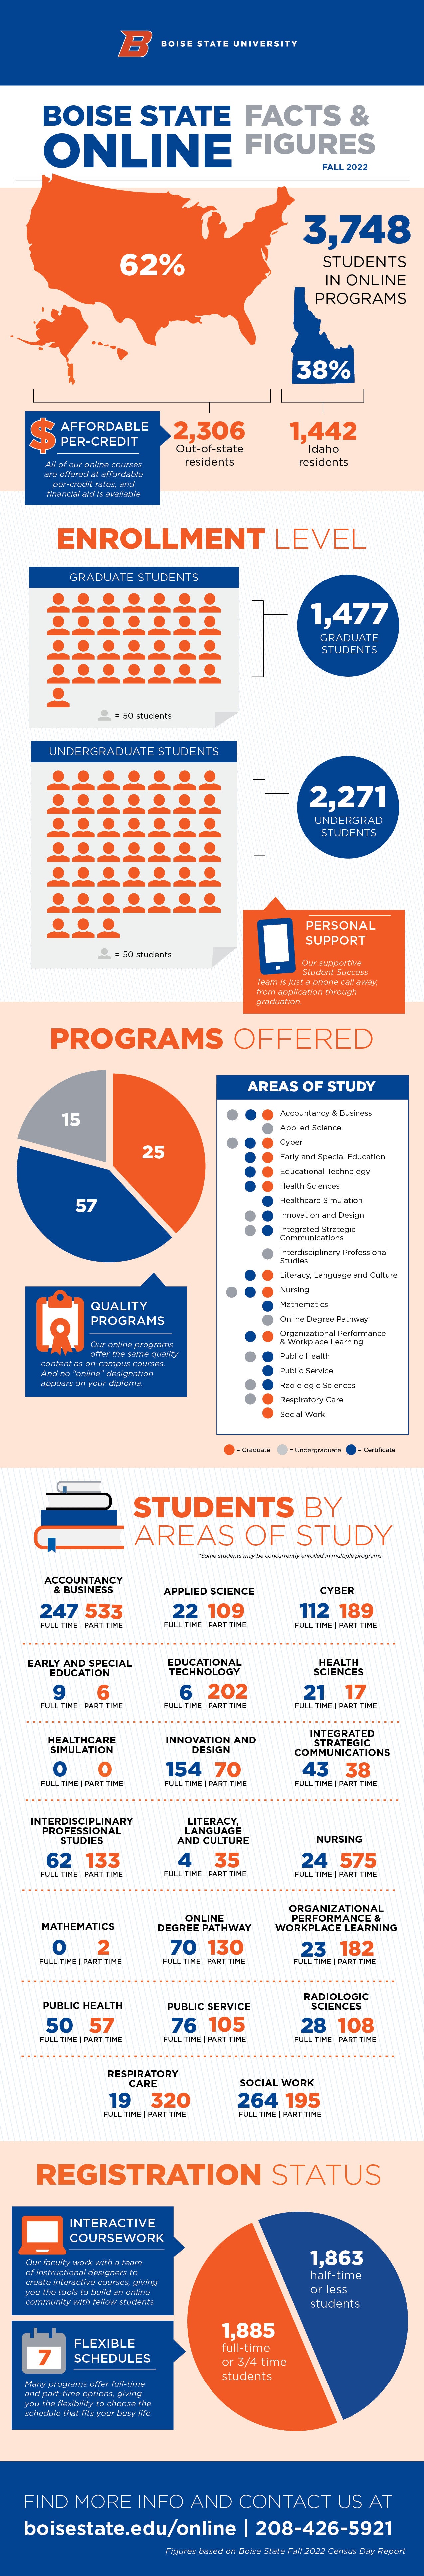 Boise State Online Fall 2022 Facts and Figures Infographic, see page for text description